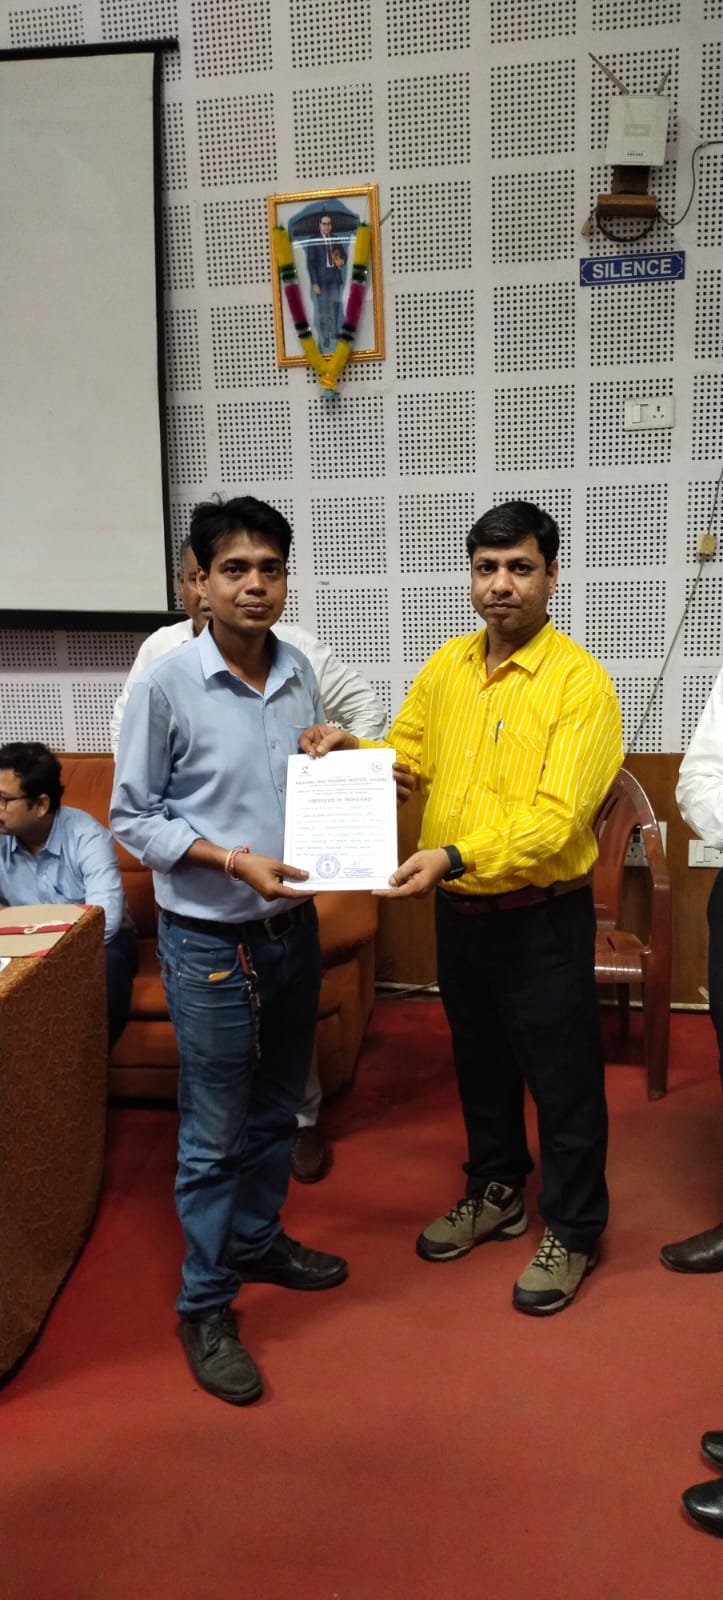 Skill Training Certificates to 83 operatives at National Skill Training Institute, Dasnagar, Howrah on 19 Oct 23